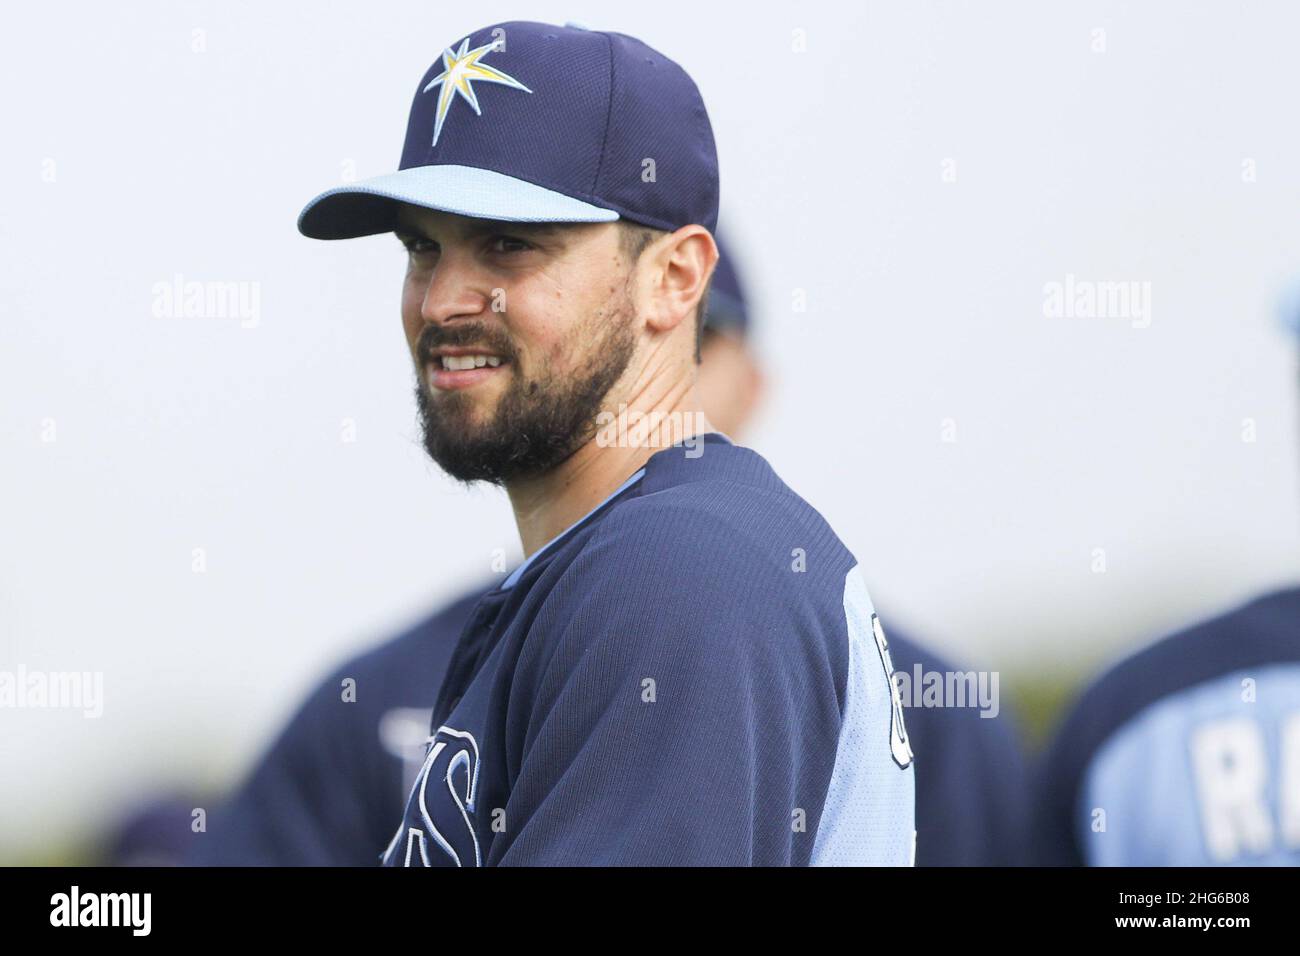 Port Charlotte, USA. 26th Feb, 2014. Tampa Bay Rays pitcher Brandon Gomes during spring training in Port Charlotte, Fla., on Wednesday, Feb. 26, 2014. The Los Angeles Dodgers are making Gomes their new general manager. (Photo by Will Vragovi/Tampa Bay Times/TNS/Sipa USA) Credit: Sipa USA/Alamy Live News Stock Photo